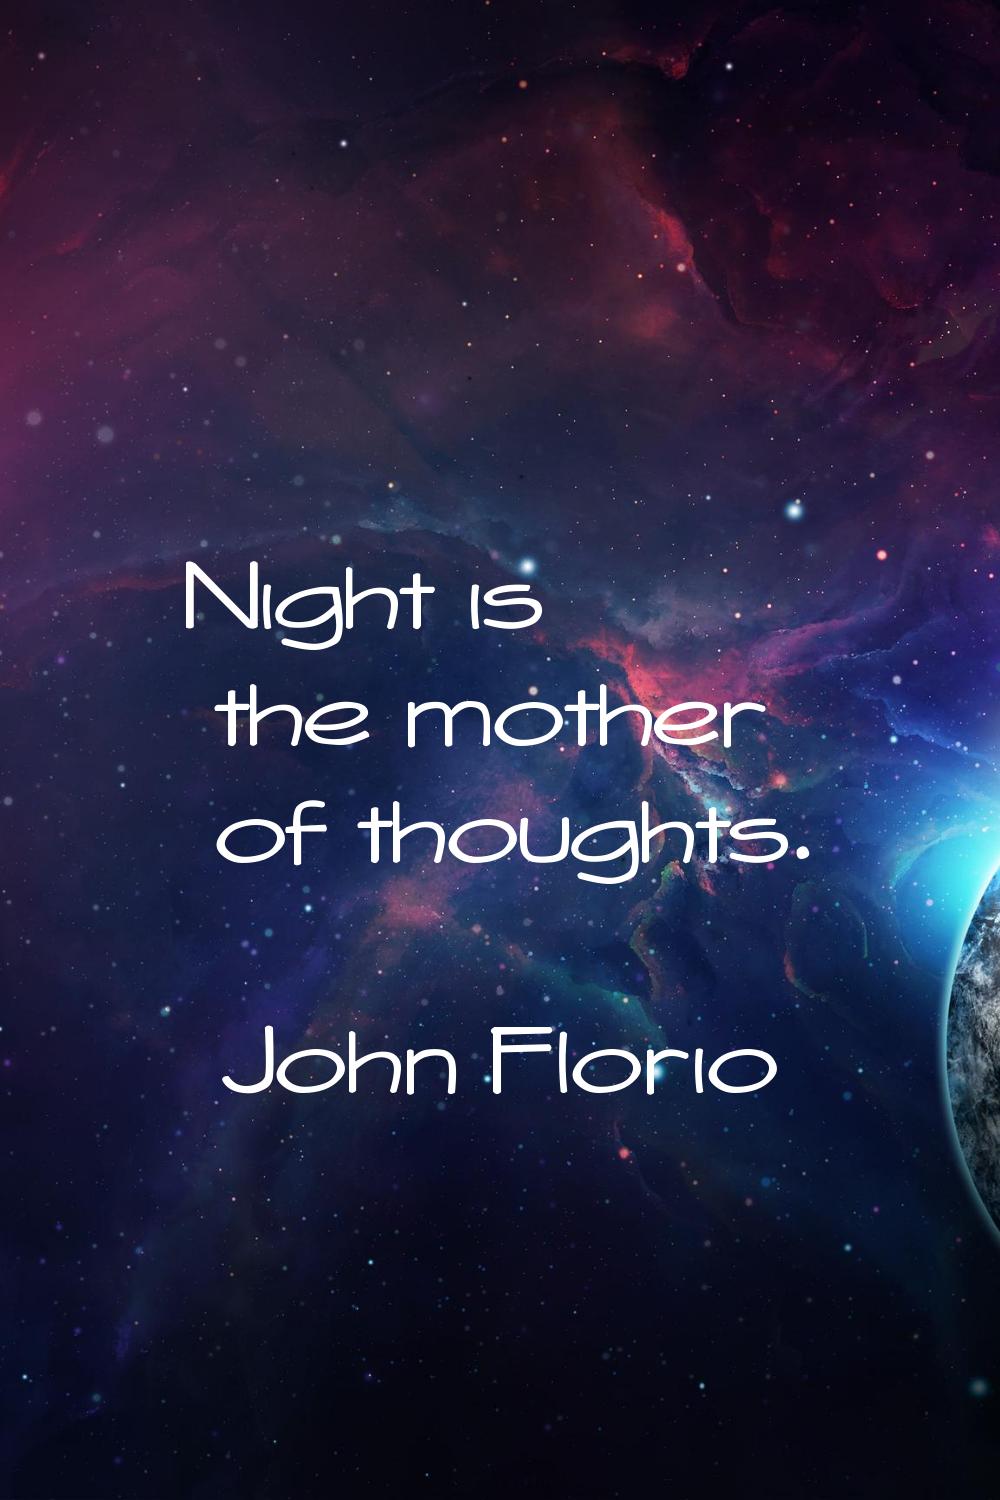 Night is the mother of thoughts.